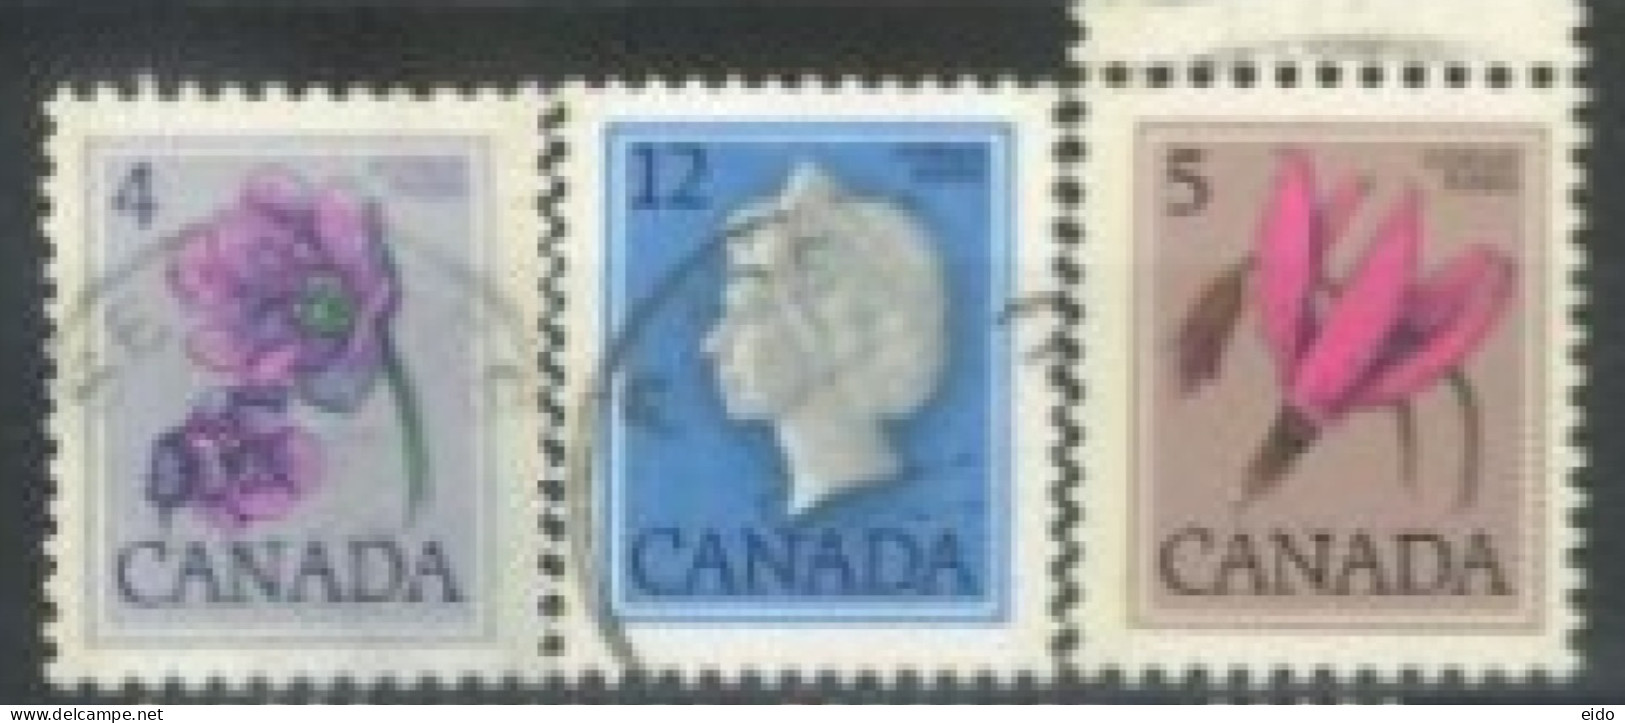 CANADA - 1977, QUEEN ELIZABETH II, & FLOWERS STAMPS SET OF 3, USED. - Used Stamps